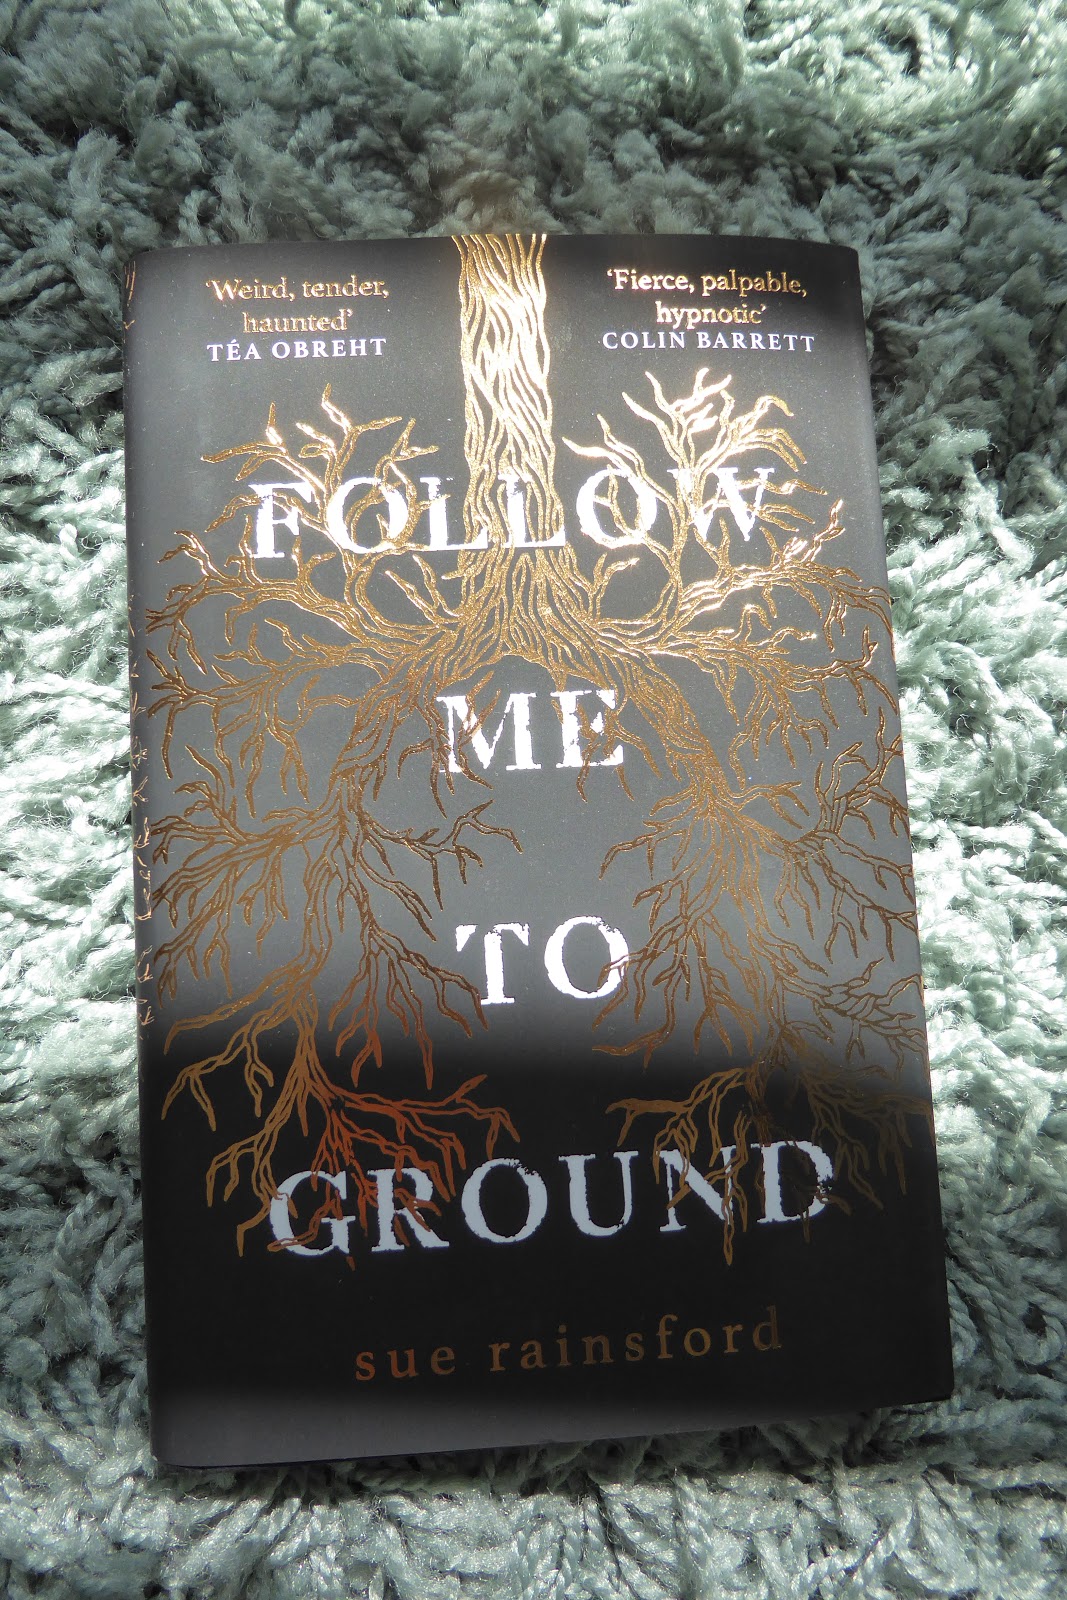 Download Follow me to ground book review No Survey